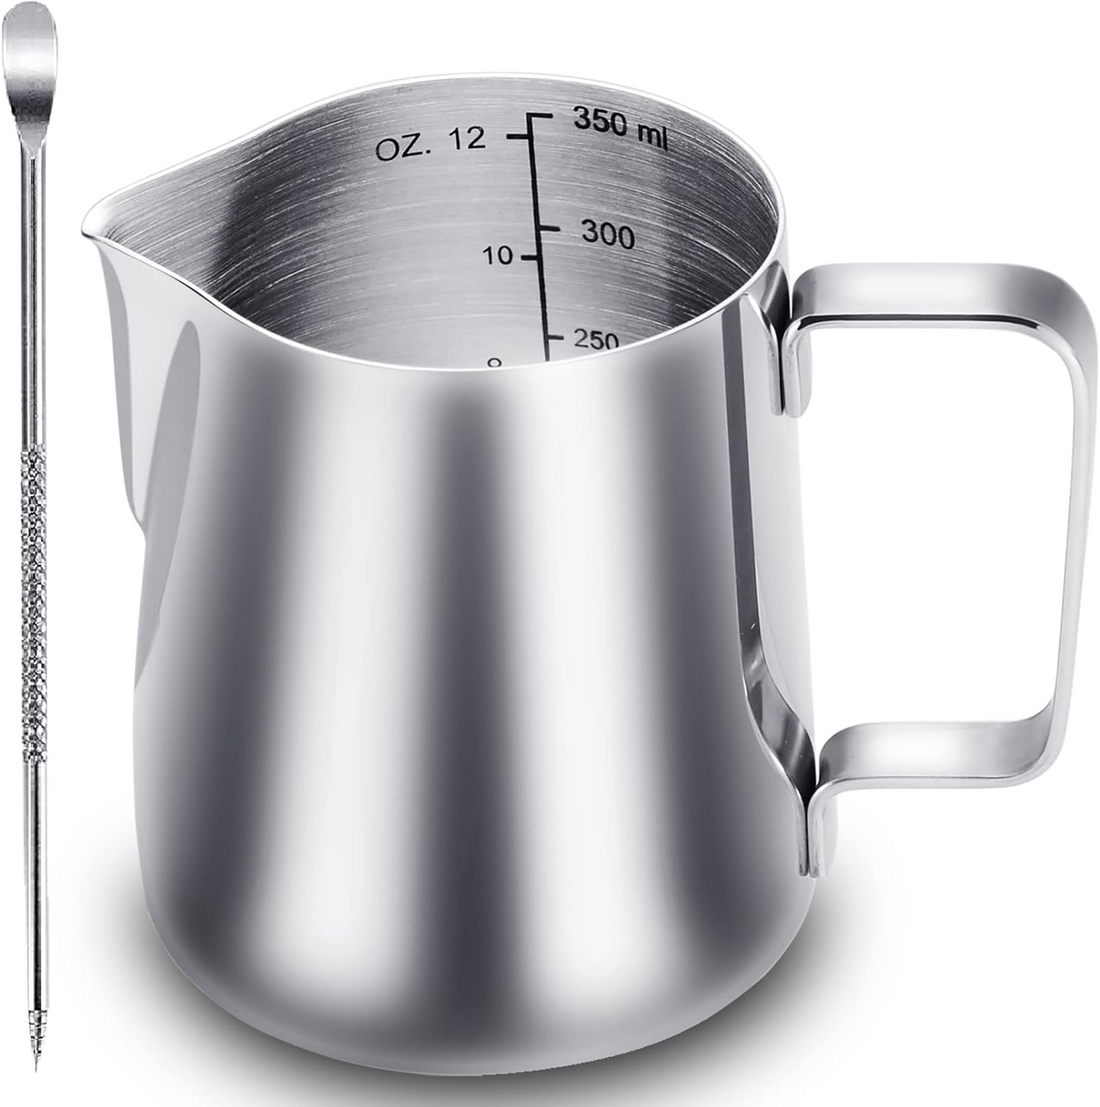 CAMKYDE Stainless Steel Milk Frothing Pitcher 12 oz - Luxe1